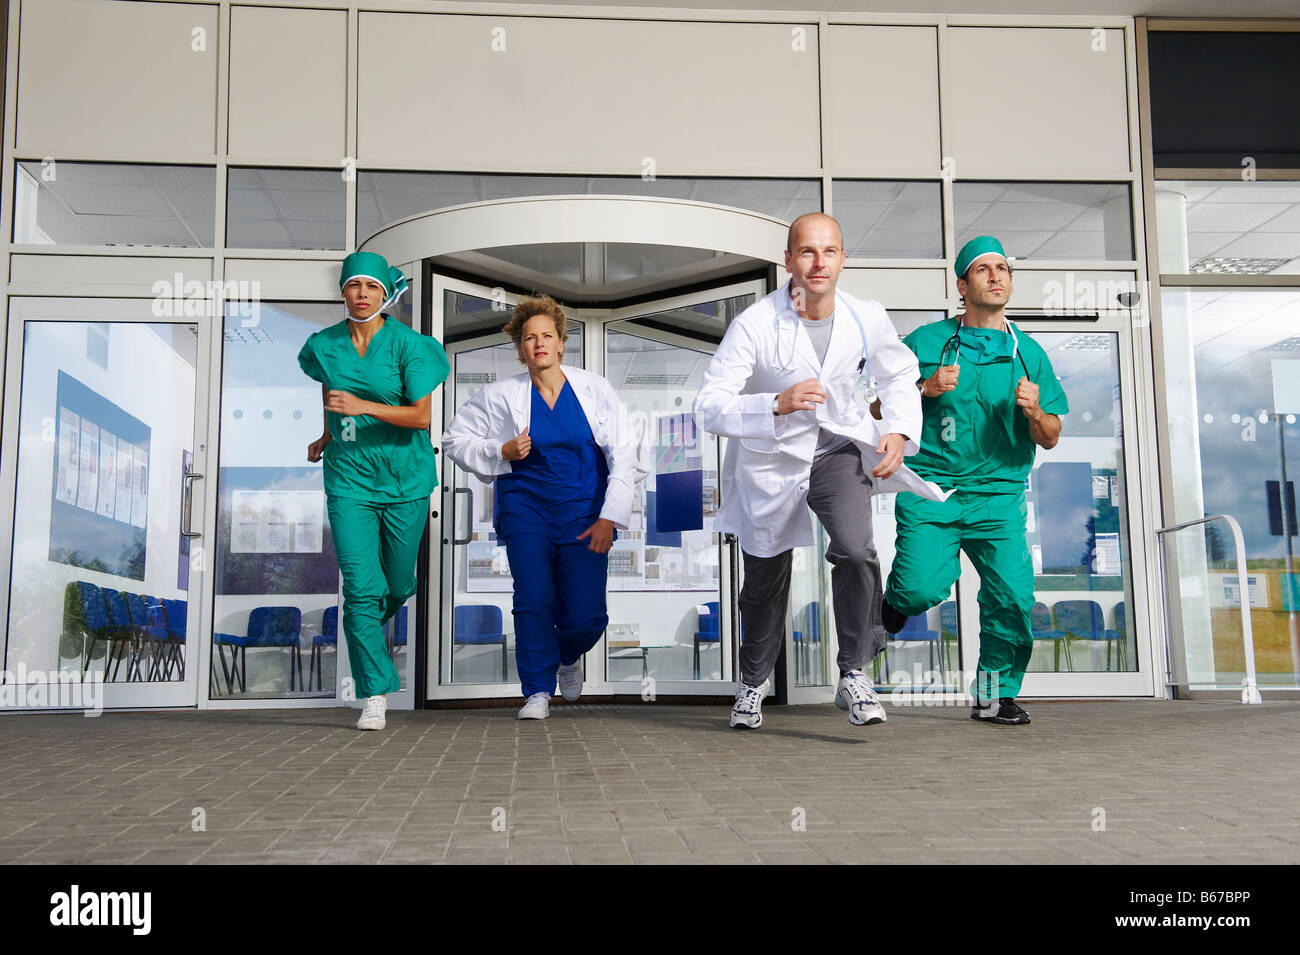 Medical team rushing out of door Stock Photo